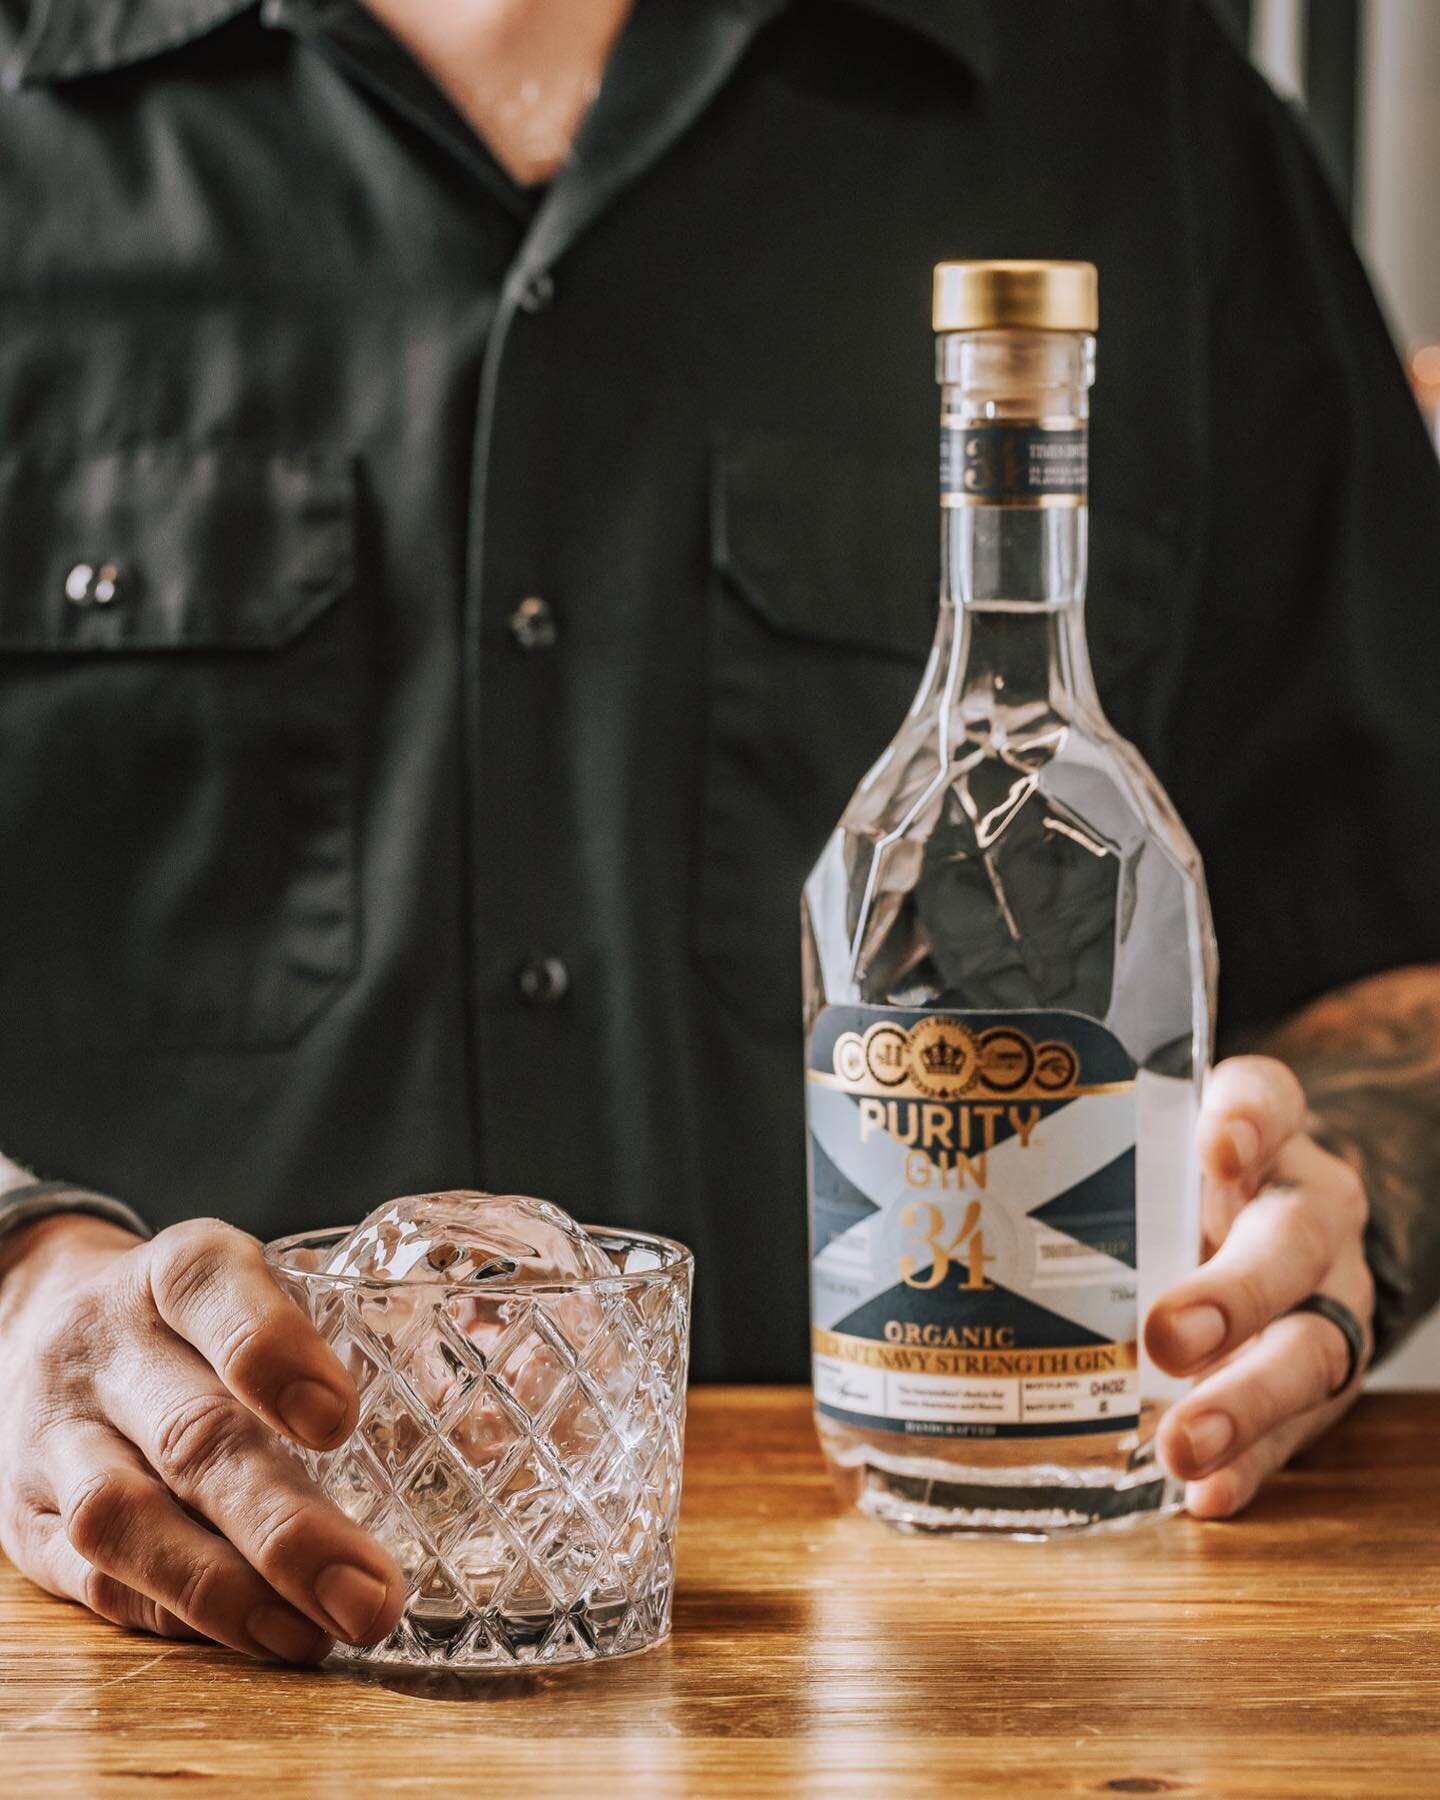 If you&rsquo;re a gin drinker, our Purity Navy Strength Organic Gin is bound to be your new favorite. It has won awards around the world, and you&rsquo;re sure to taste why.

You can order it online at puritydistillery.com, link in bio!

#puritydisti